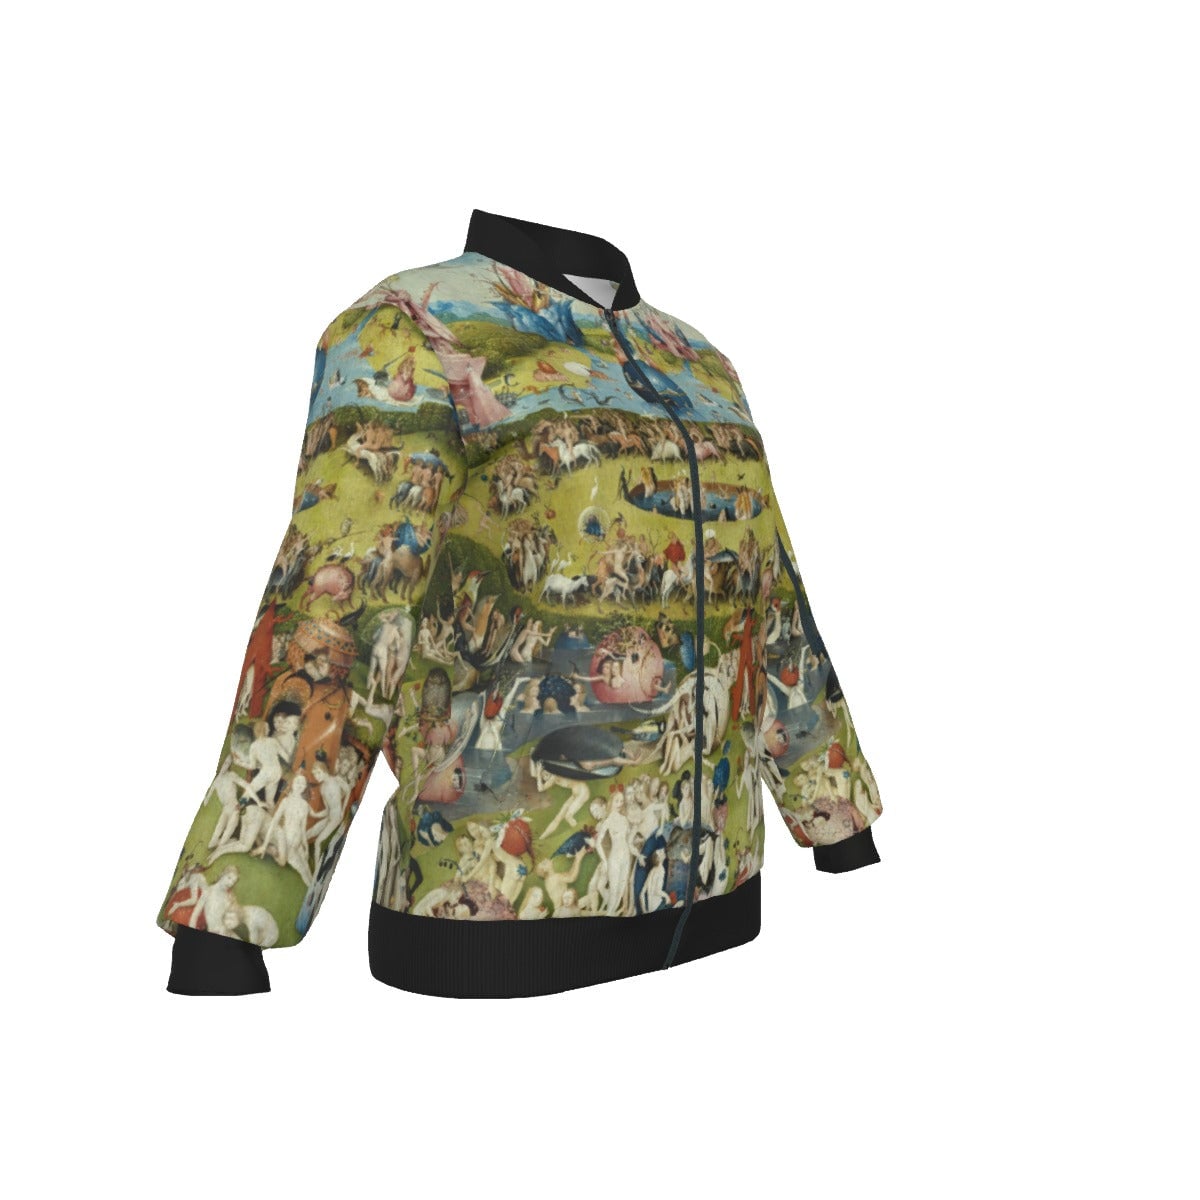 The Garden of Earthly Delights by Hieronymus Bosch Women’s Jacket